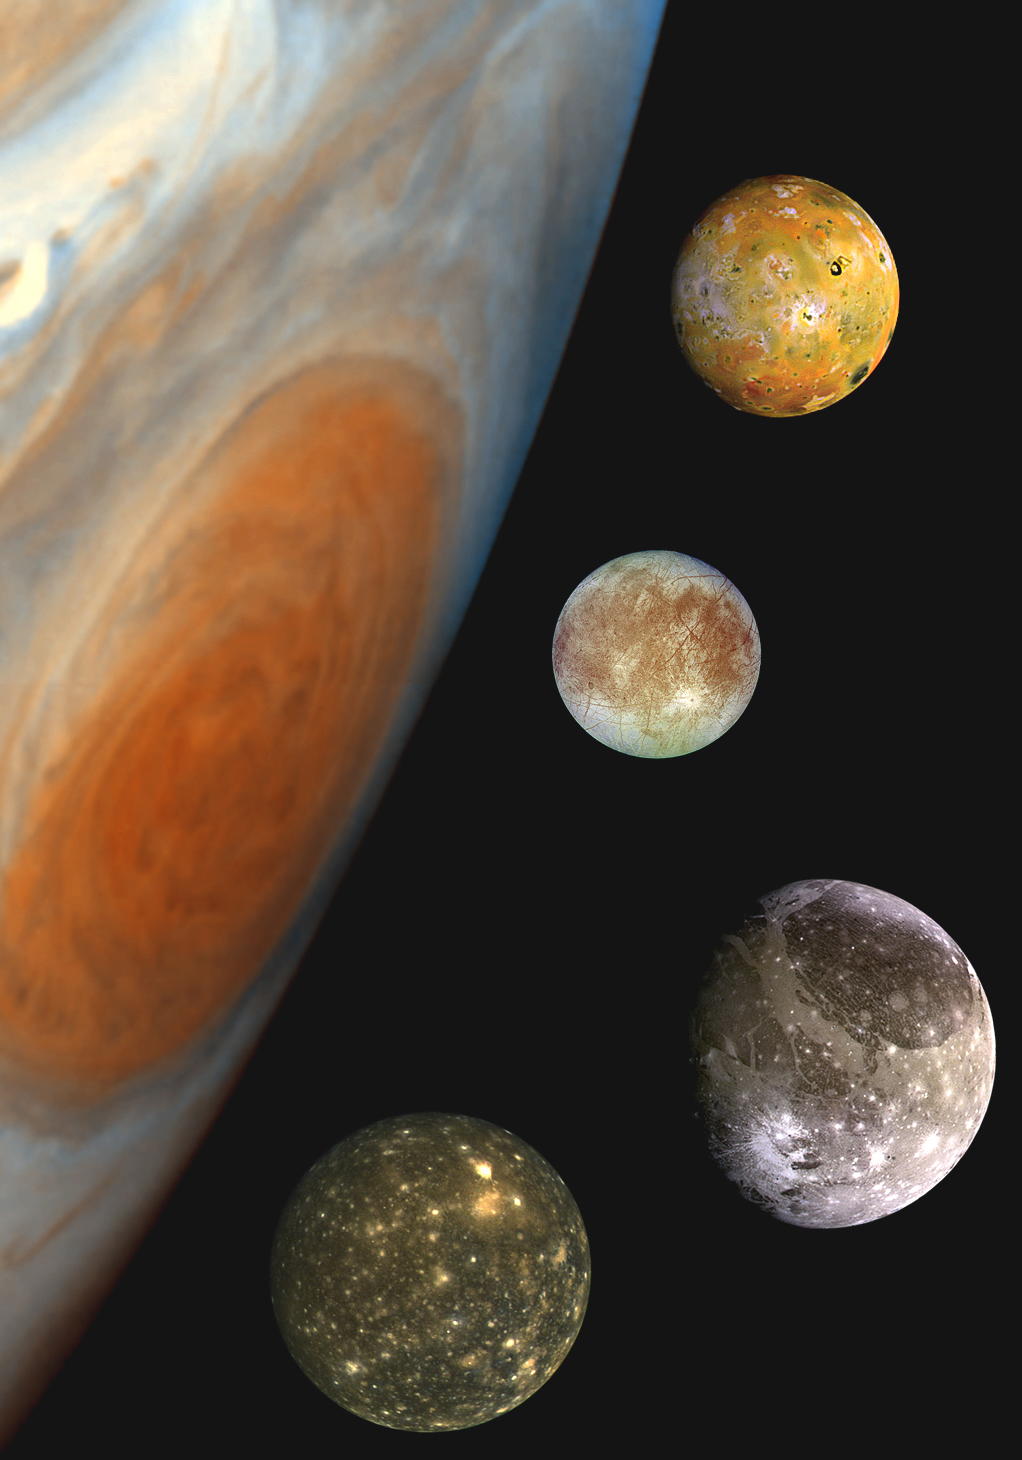 Composite image of Jupiter on the left and moons on the right